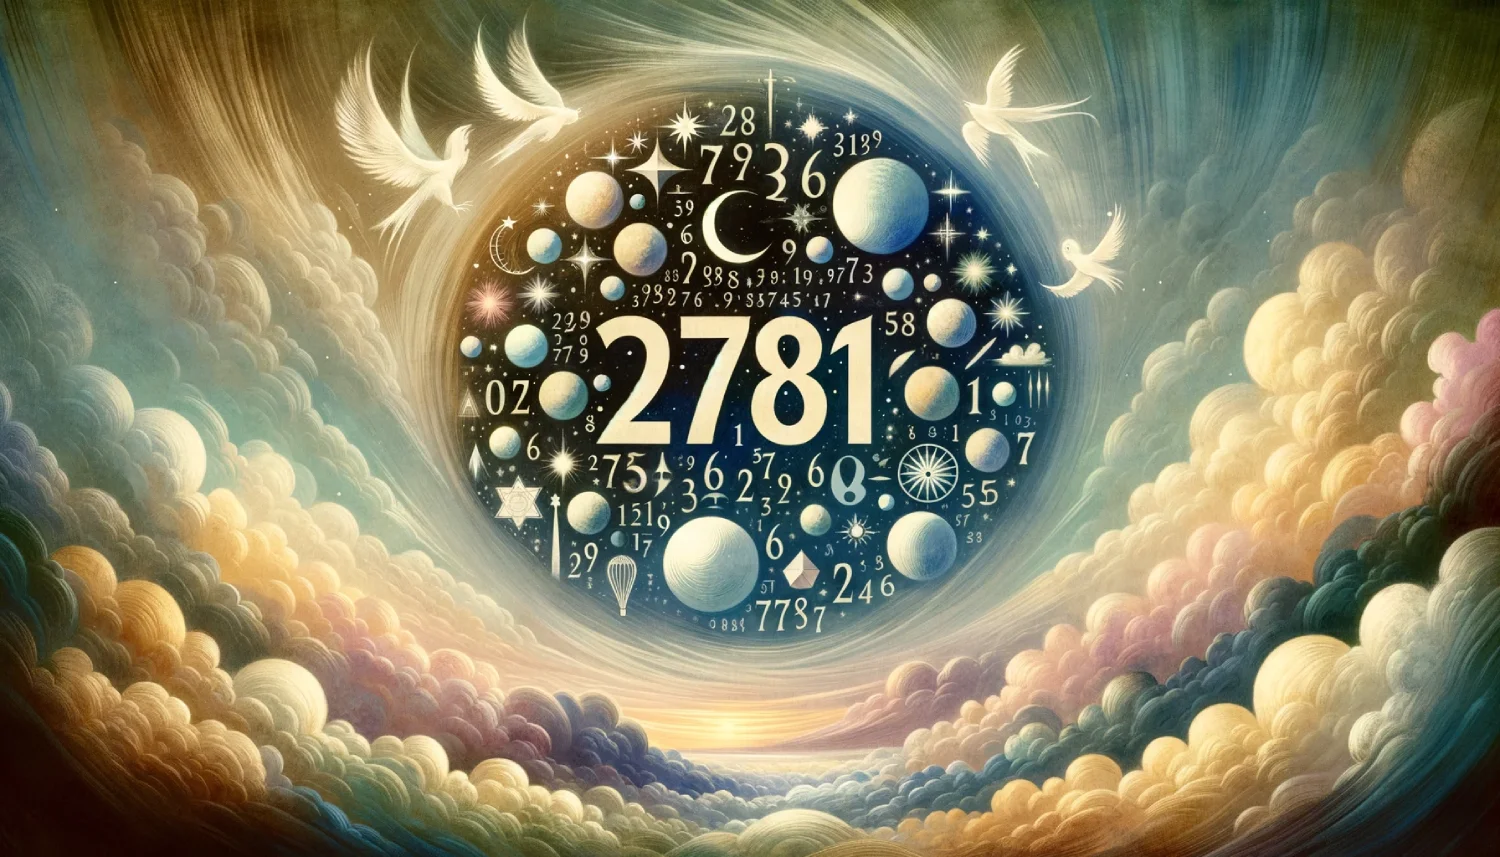 what is the meaning of Angel number 2781?